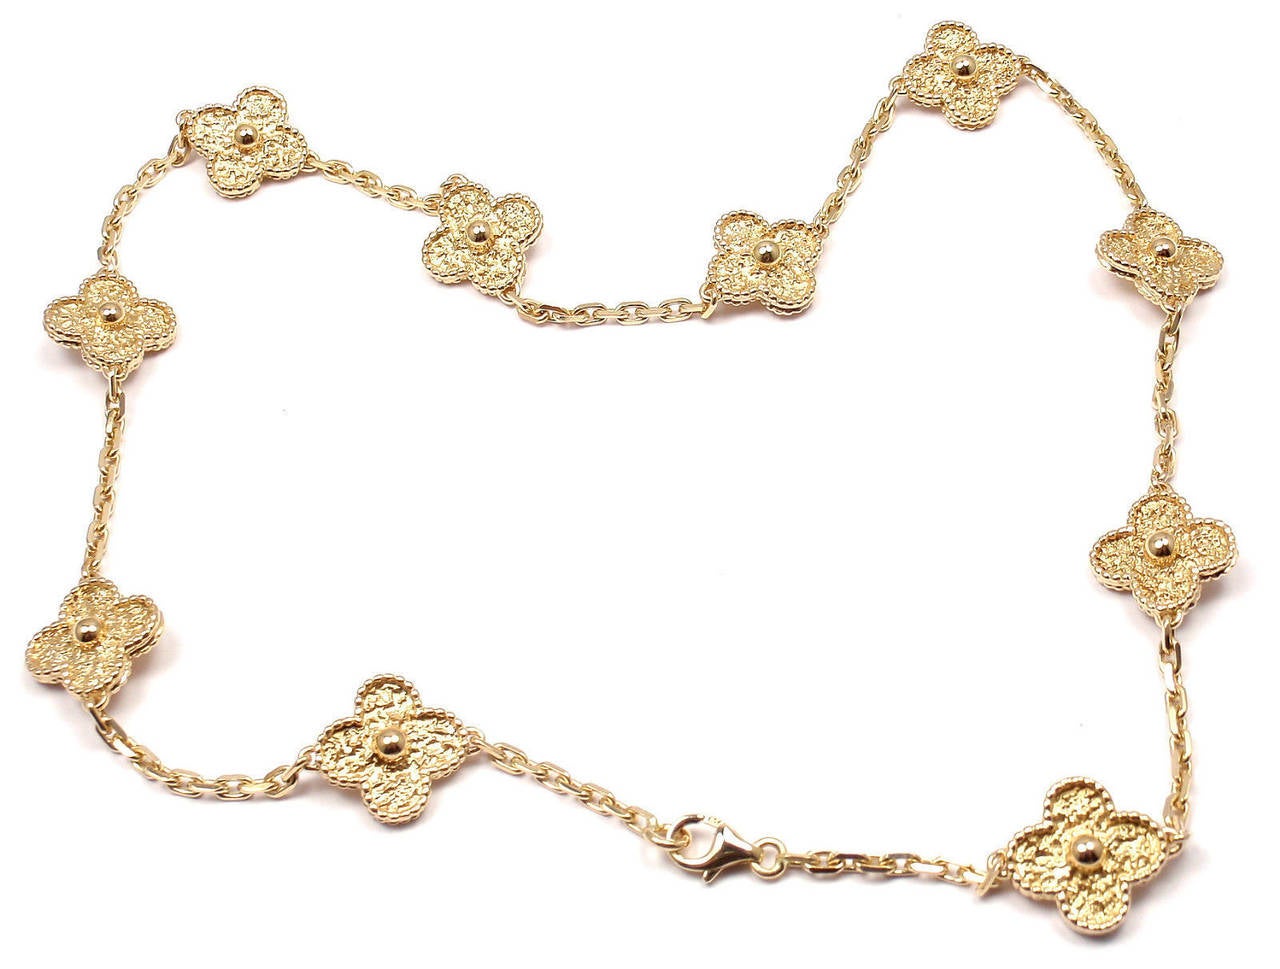 18k Yellow Gold Vintage Alhambra 10 Motif Necklace by Van Cleef & Arpels. 
This necklace comes with VCA box & VCA certificate.

Details: 
Length: 16.5